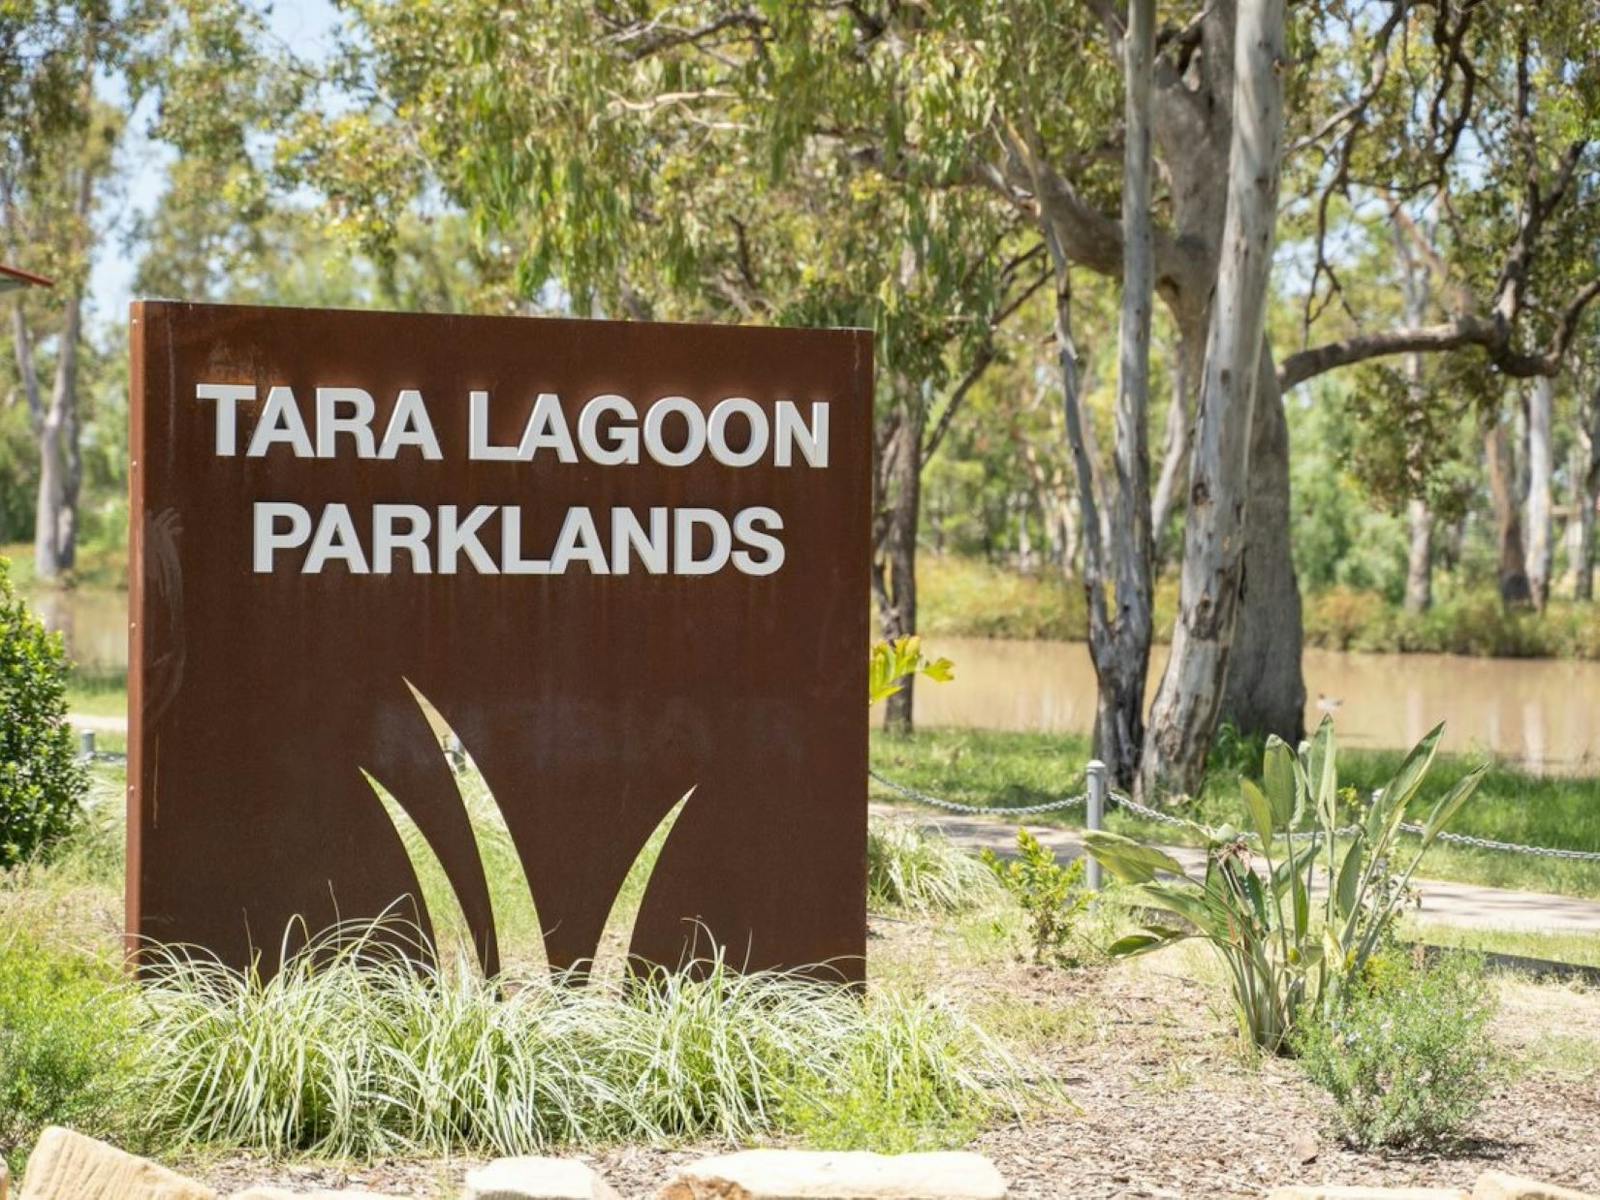 Welcome to the Tara Lagoon Parklands - a lovely spot for camping and relaxing.